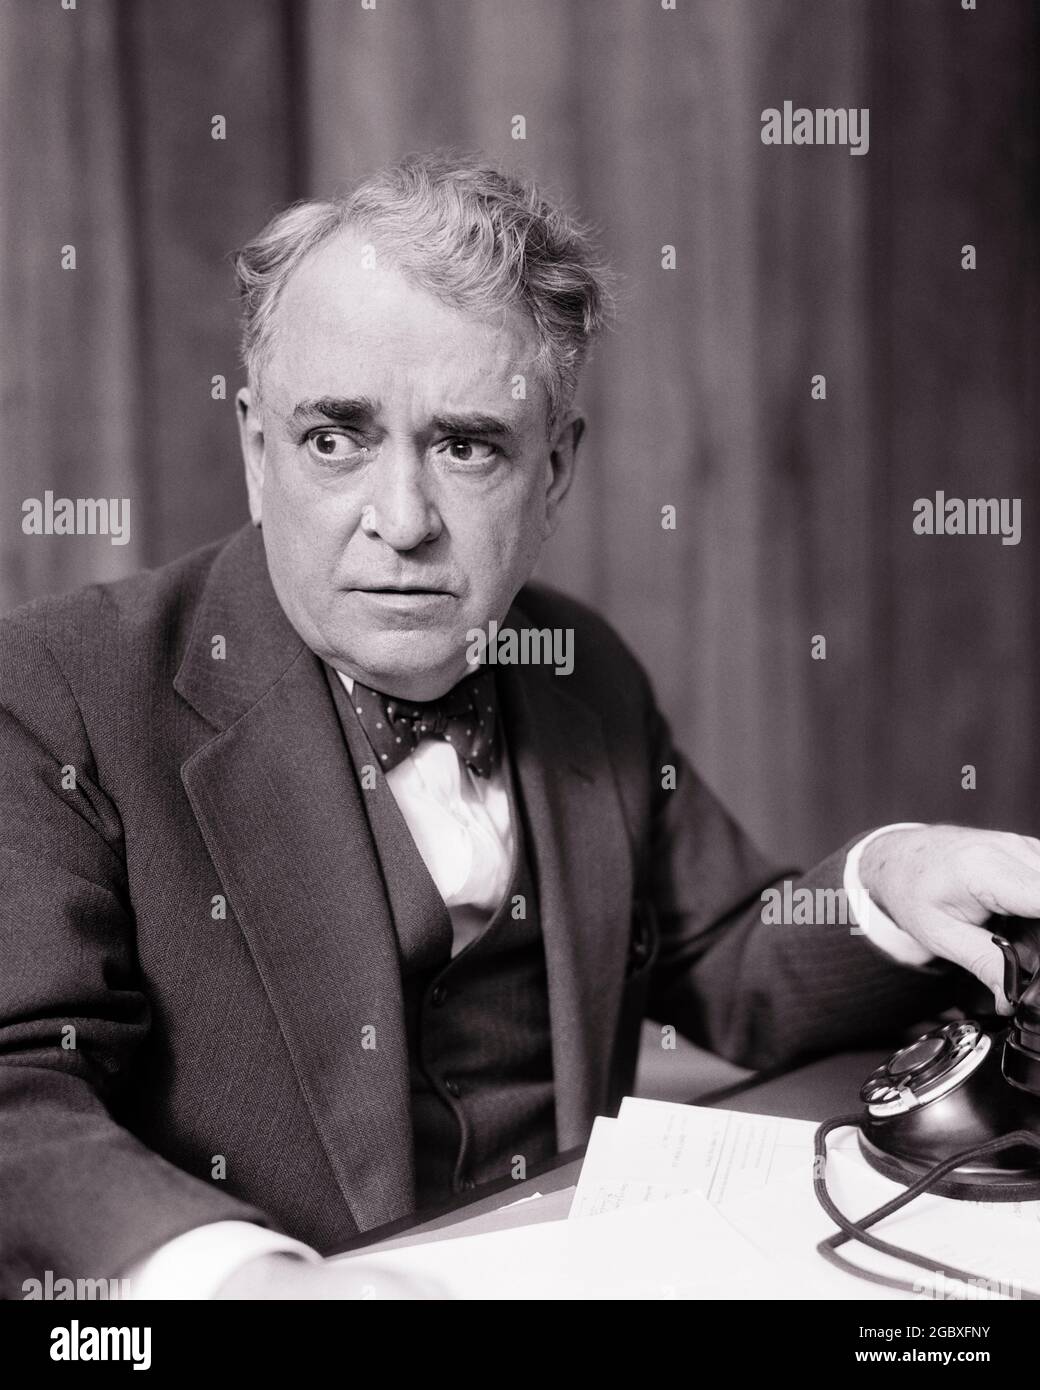 1930s SENIOR BUSINESSMAN WITH CONCERNED WORRIED FACIAL EXPRESSION REACHING FOR OR HANGING UP TELEPHONE ON HIS DESK - c5142 HAR001 HARS STUDIO SHOT COMMUNICATING COPY SPACE PERSONS MALES RISK SENIOR MAN SENIOR ADULT EXPRESSIONS TROUBLED B&W CONCERNED SUIT AND TIE OLD AGE OLDSTERS OLDSTER ANXIOUS DISCOVERY HIS BAD NEWS UP PHONES ELDERS CONCEPTUAL TELEPHONES OR ALARMED BLACK AND WHITE CAUCASIAN ETHNICITY HAR001 OLD FASHIONED UNCERTAIN Stock Photo